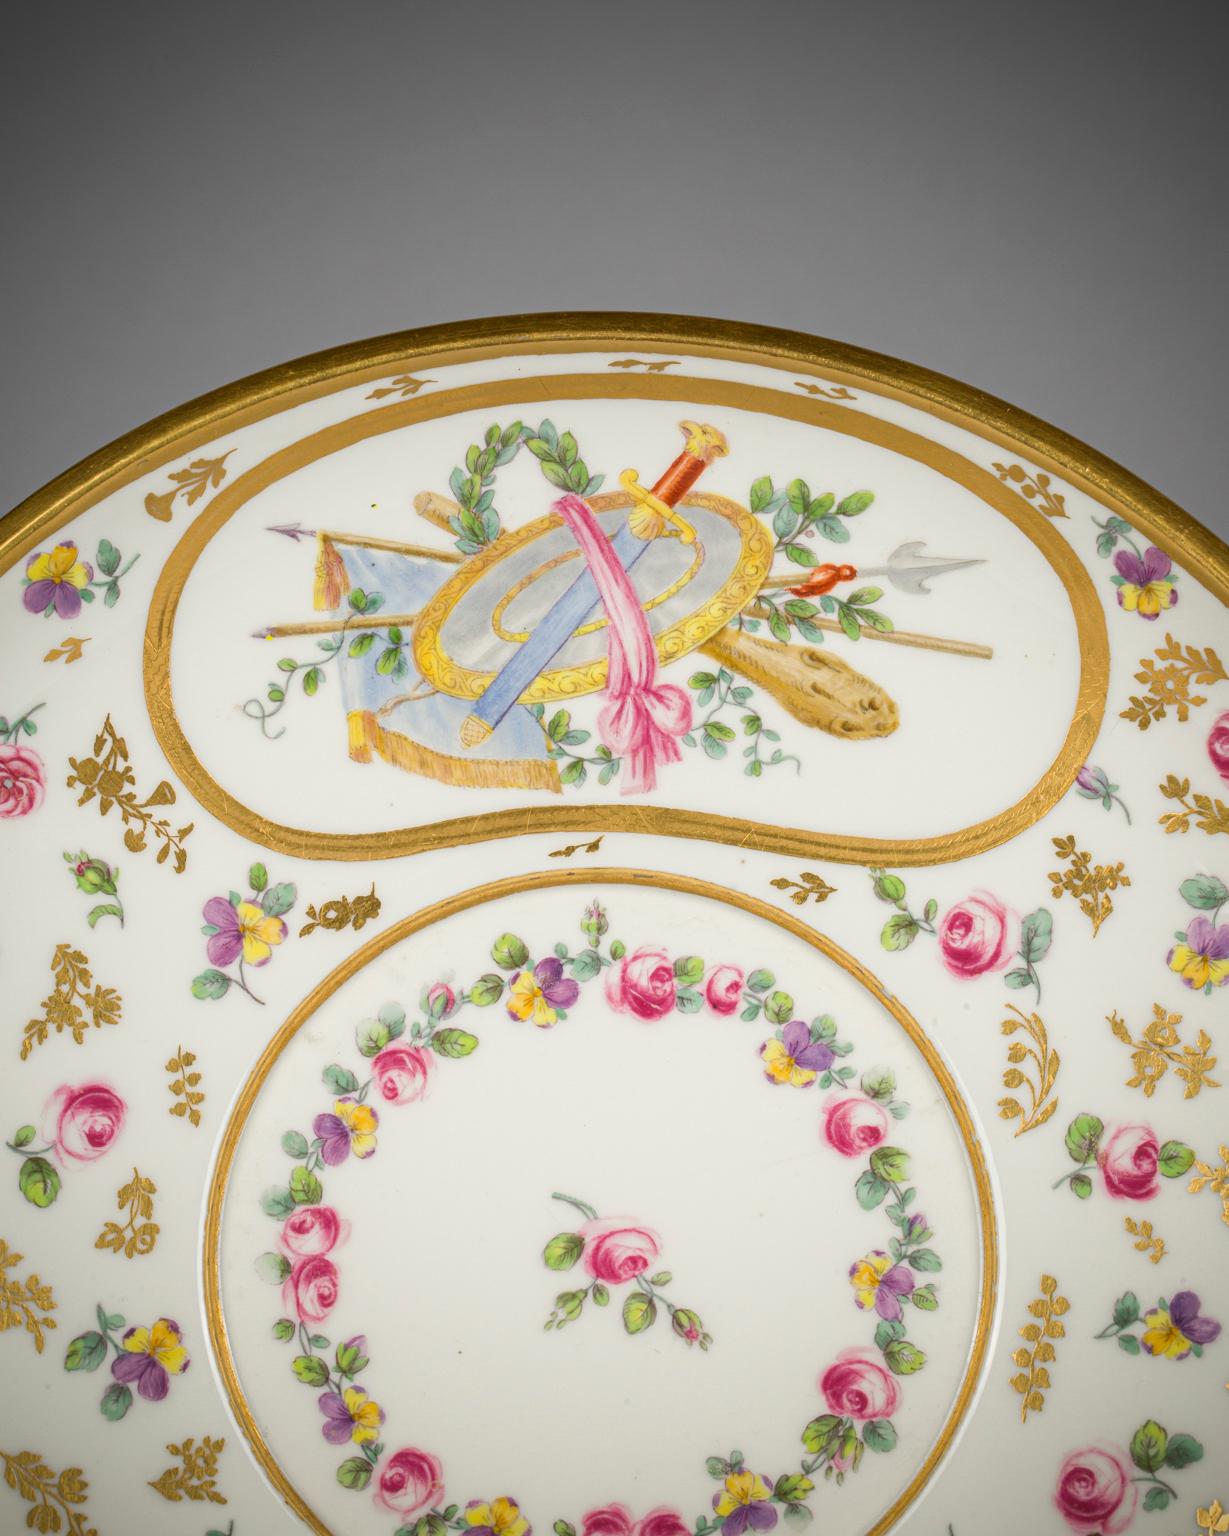 Sèvres White Glazed and Gilt Porcelain Écuelle, Cover and Underplate, circa 1775 In Good Condition For Sale In New York, NY